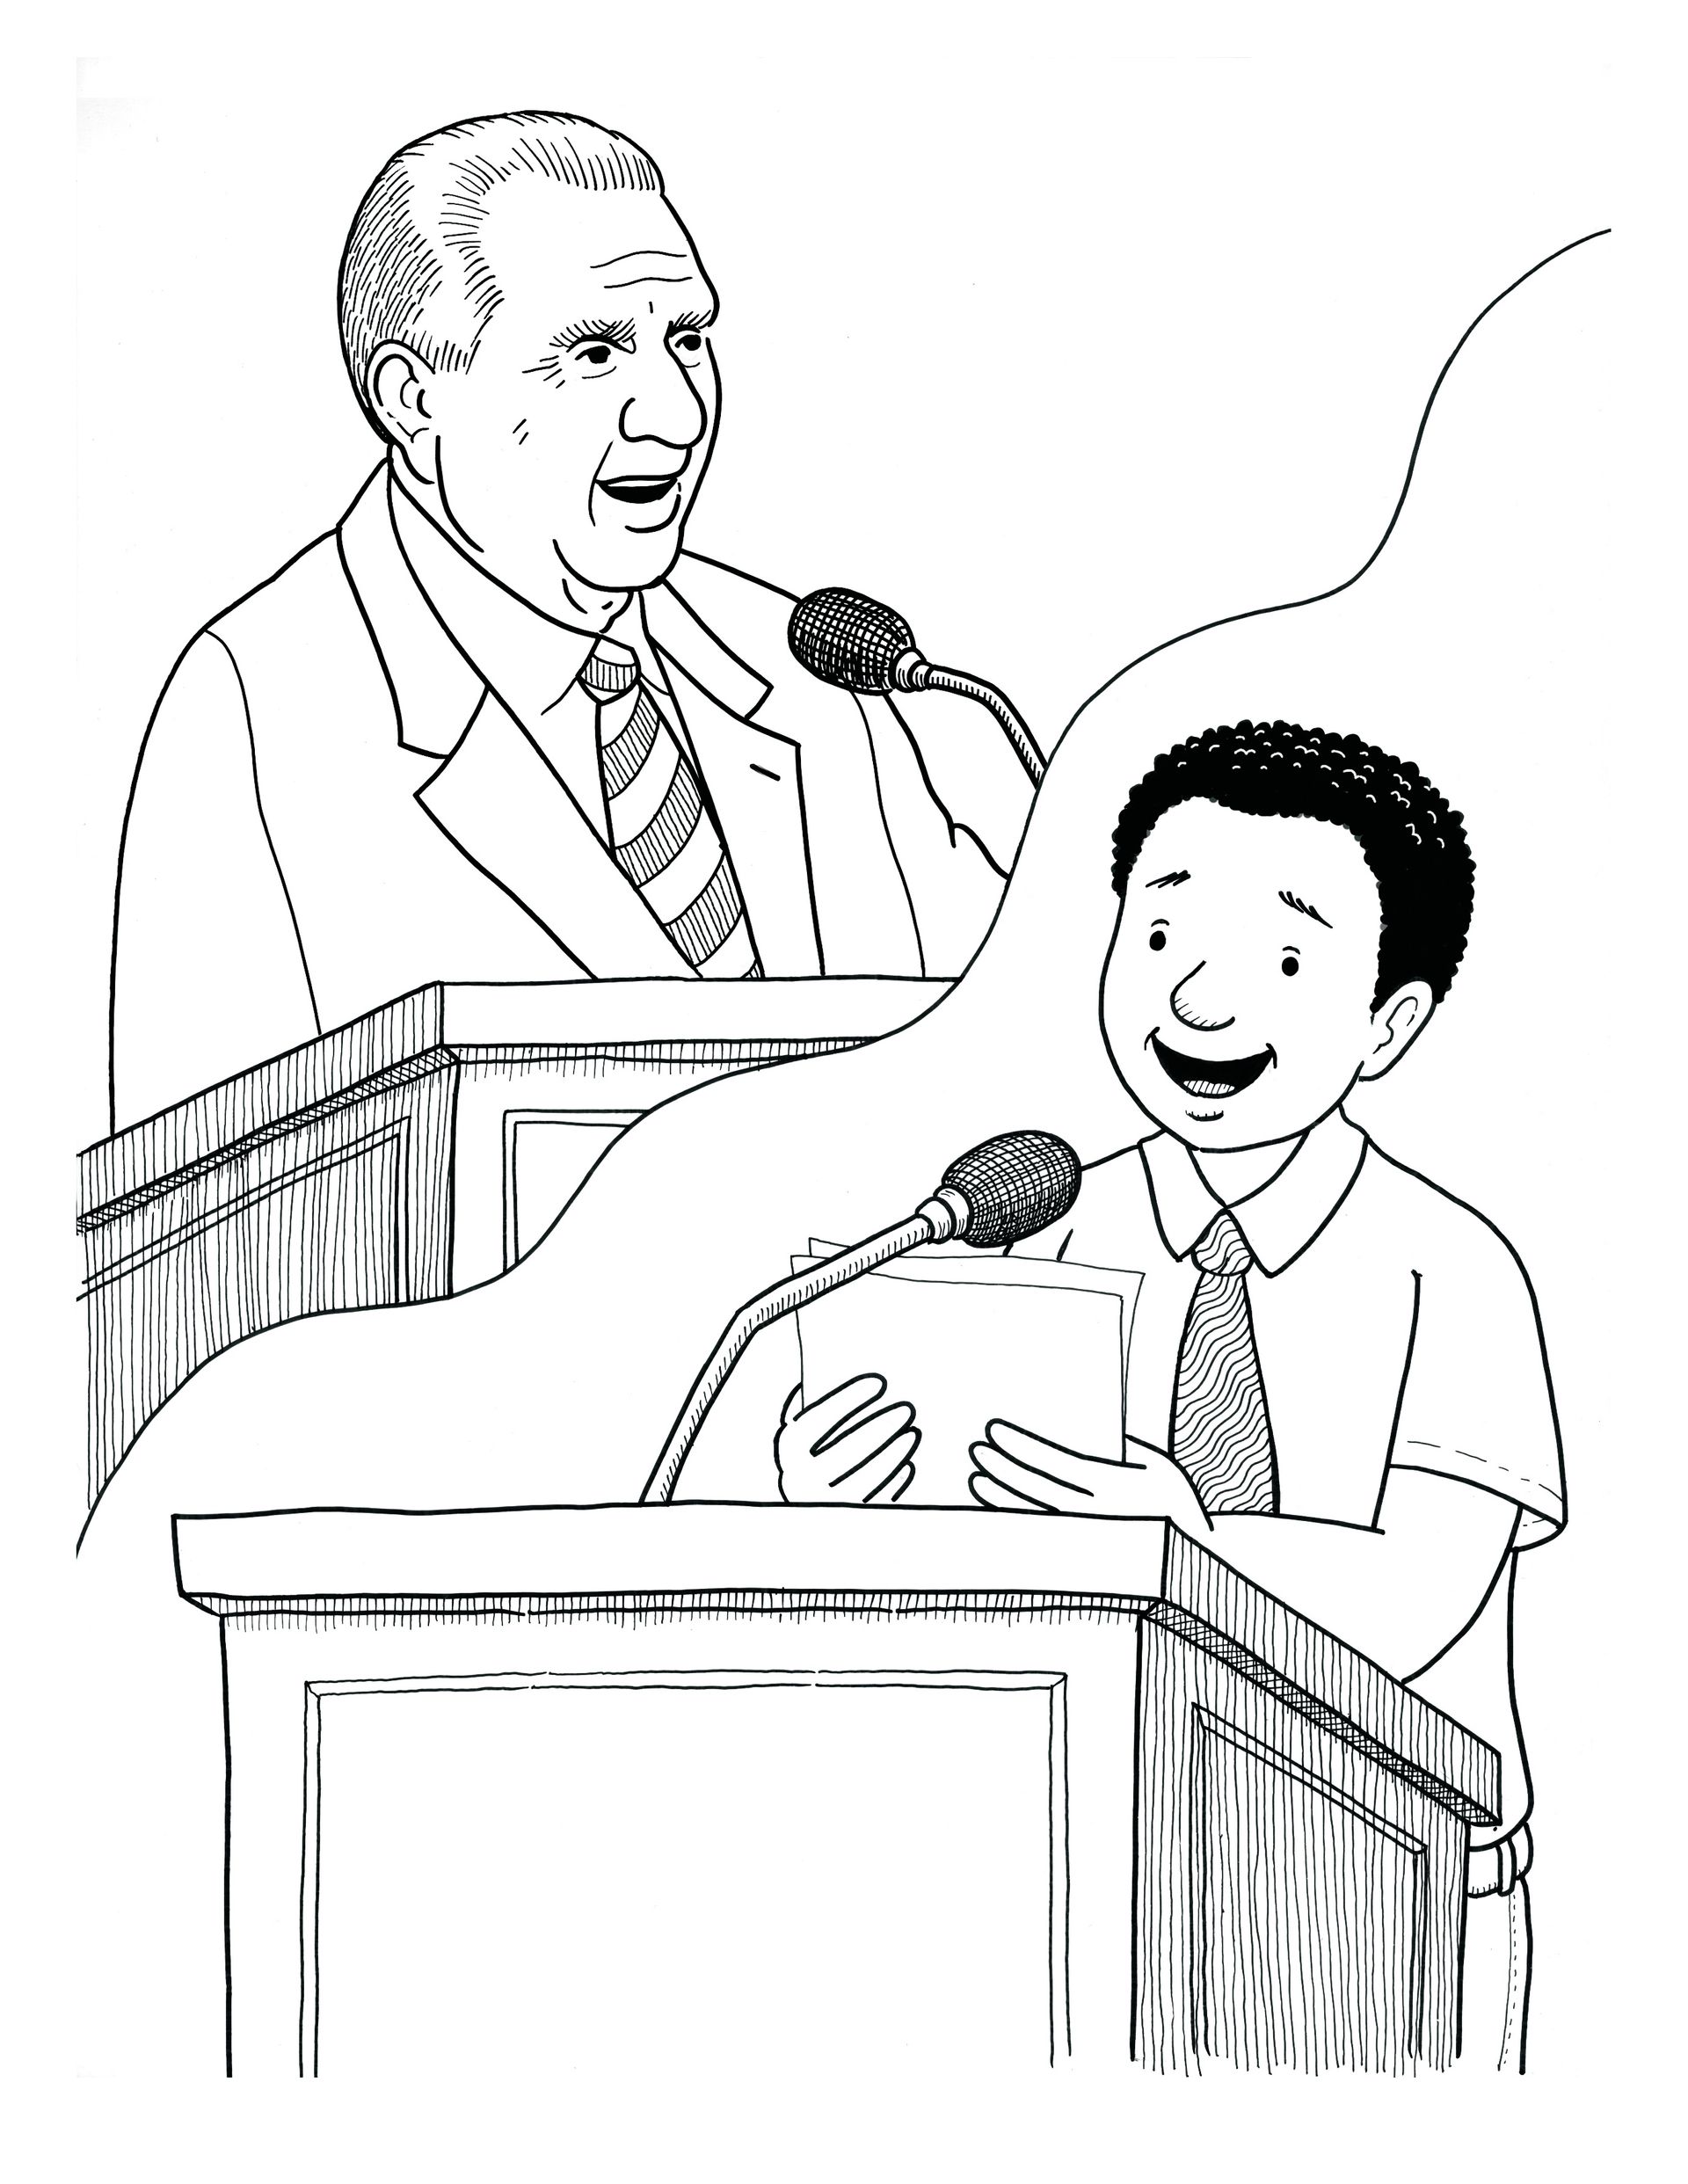 A boy gives a talk at the pulpit alongside an image of President Monson speaking at the pulpit.